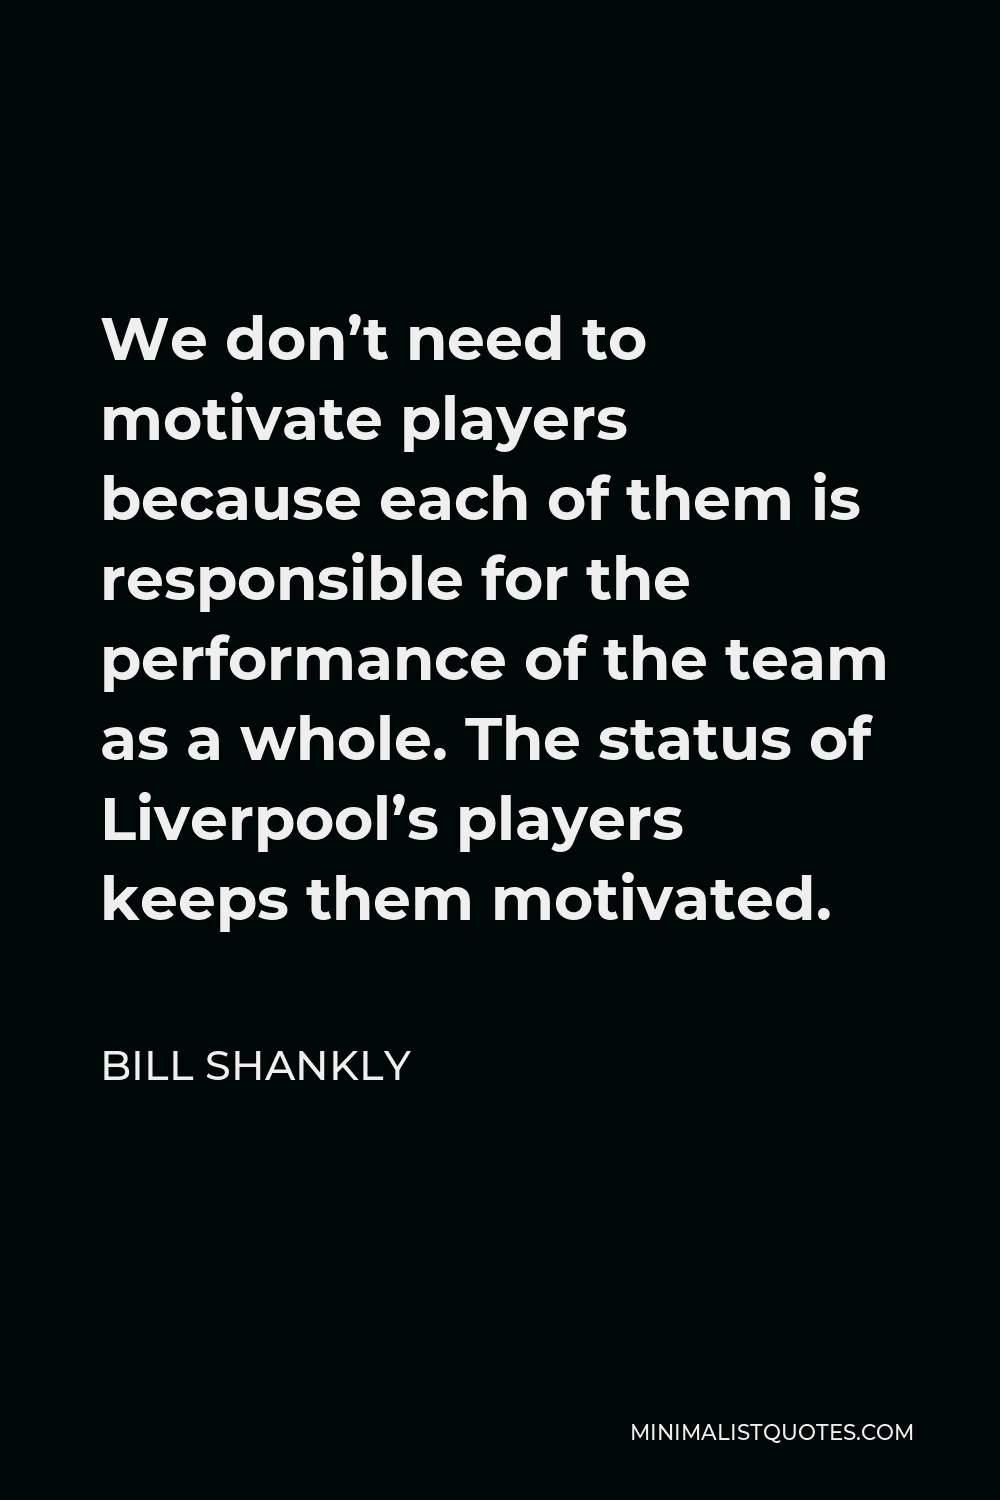 Bill Shankly Quote - We don’t need to motivate players because each of them is responsible for the performance of the team as a whole. The status of Liverpool’s players keeps them motivated.